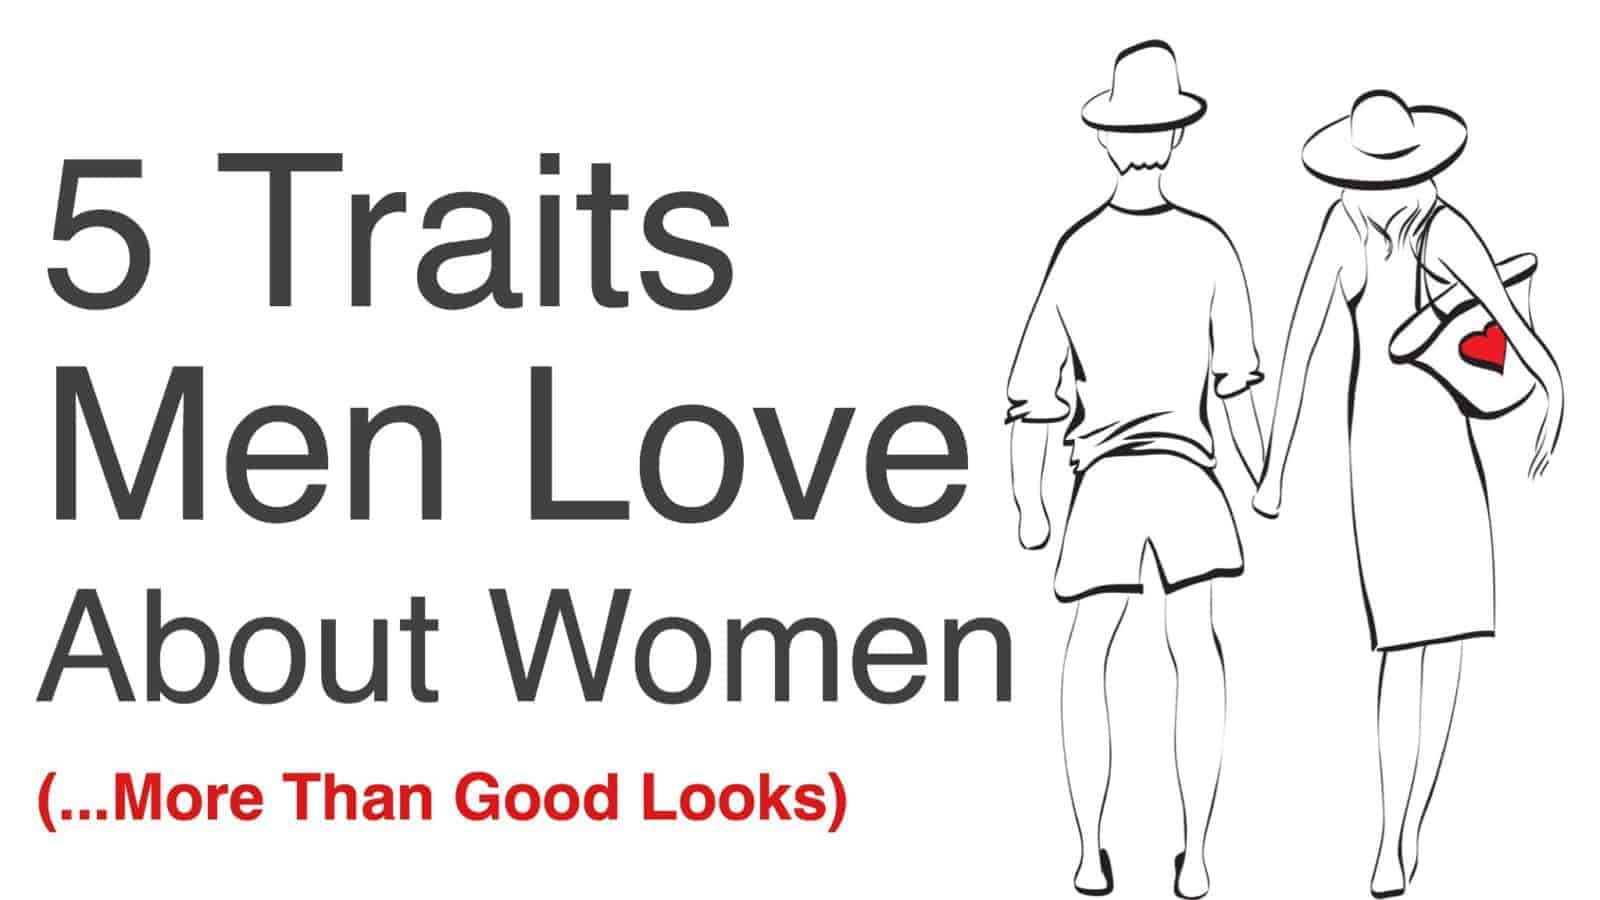 5 Traits Men Love About Women (More Than Good Looks)